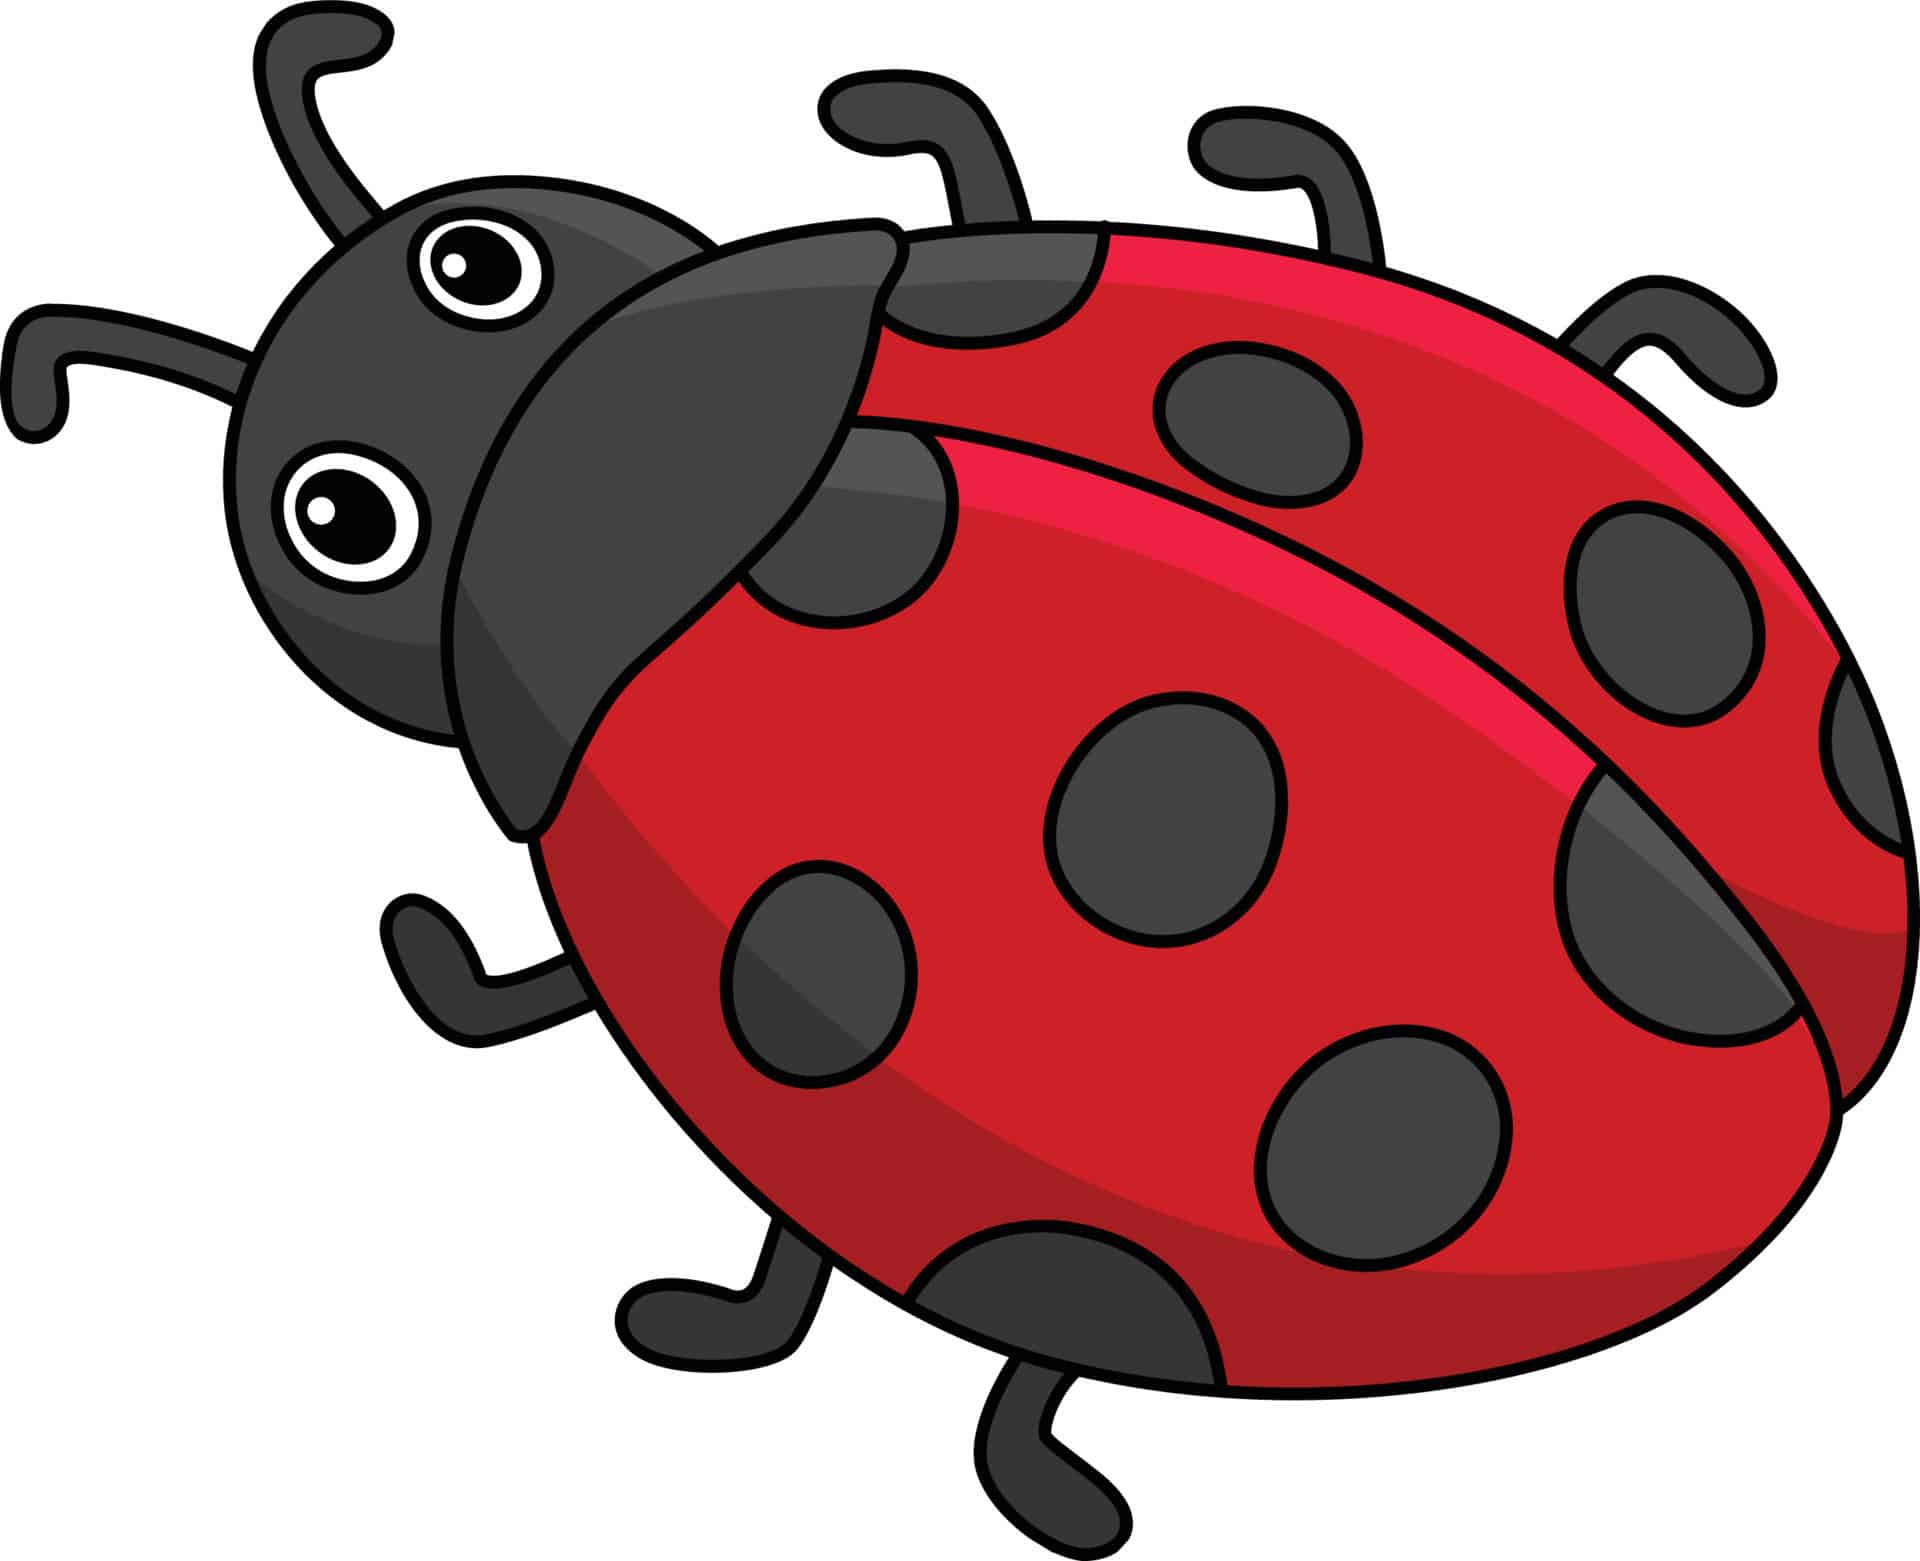 A ladybug with a vibrant red body and black spots on its wings, joyfully laughing with a sense of humor